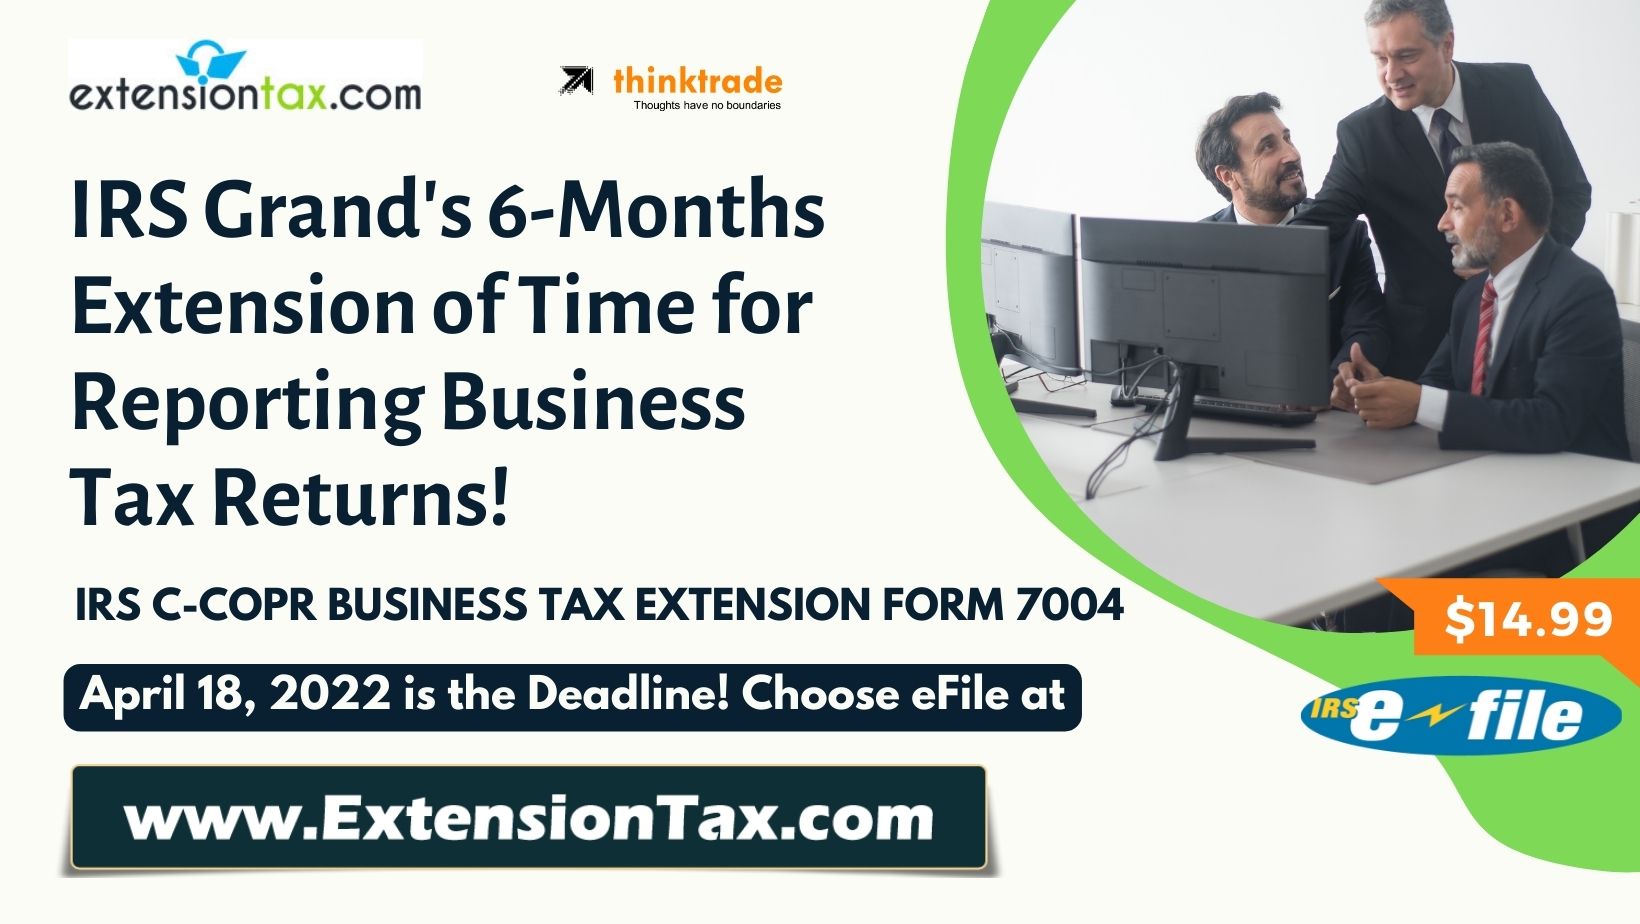 Corporate Extension Tax Due Date April 18